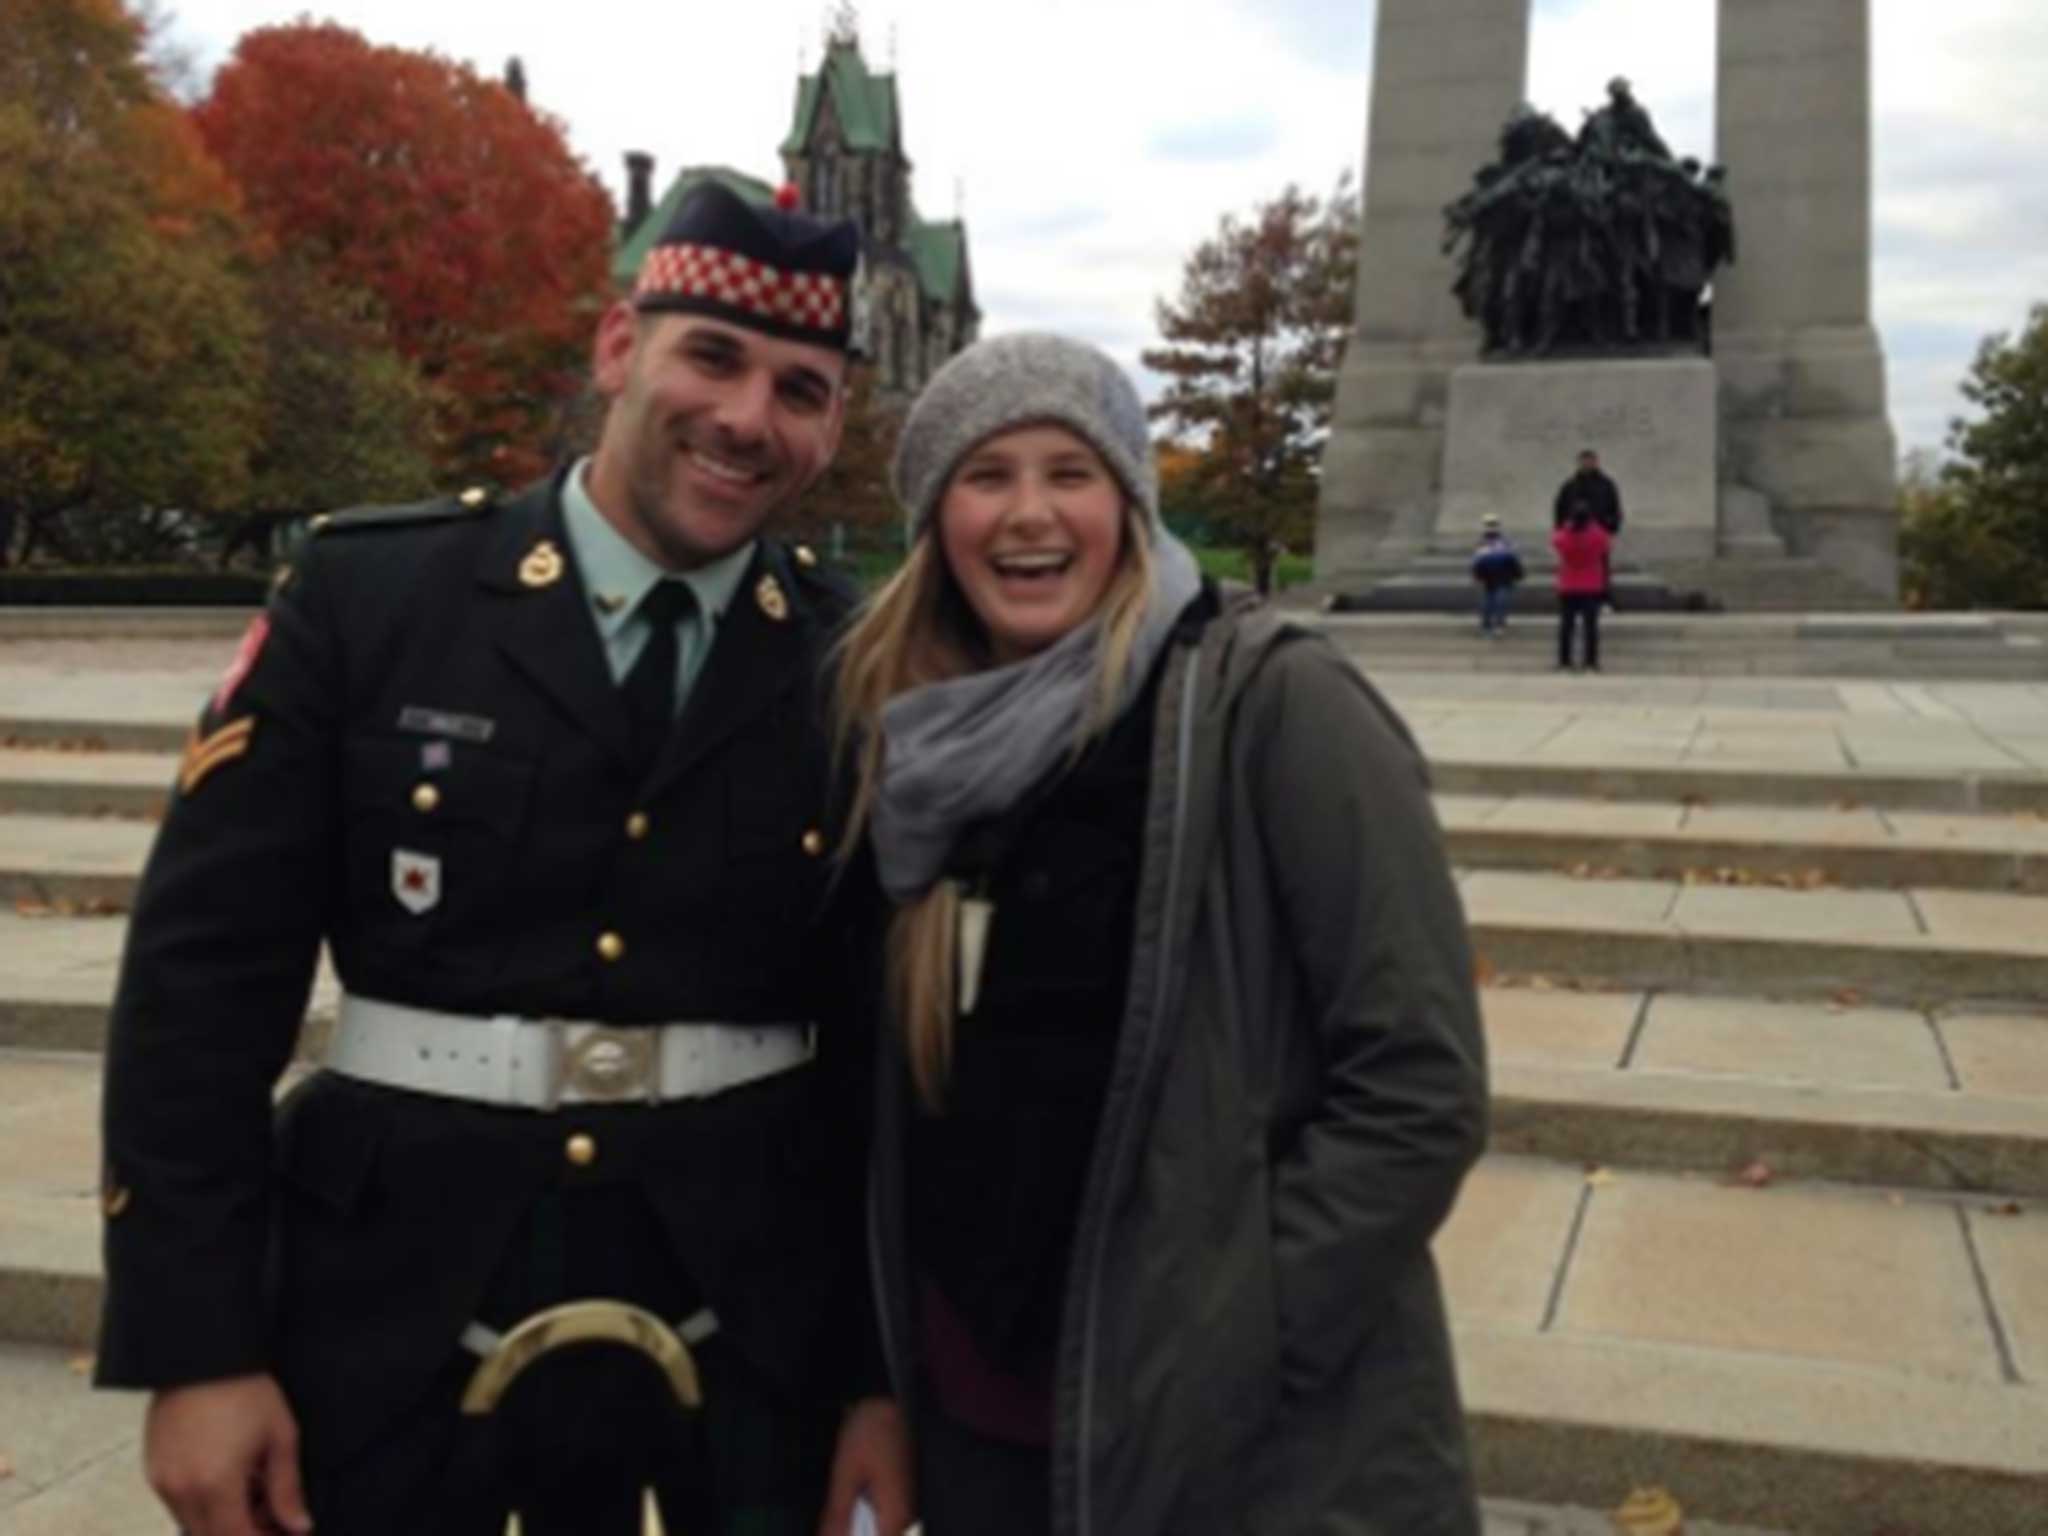 Tourist Megan Underwood posed with Corporal Cirillo before the shooting